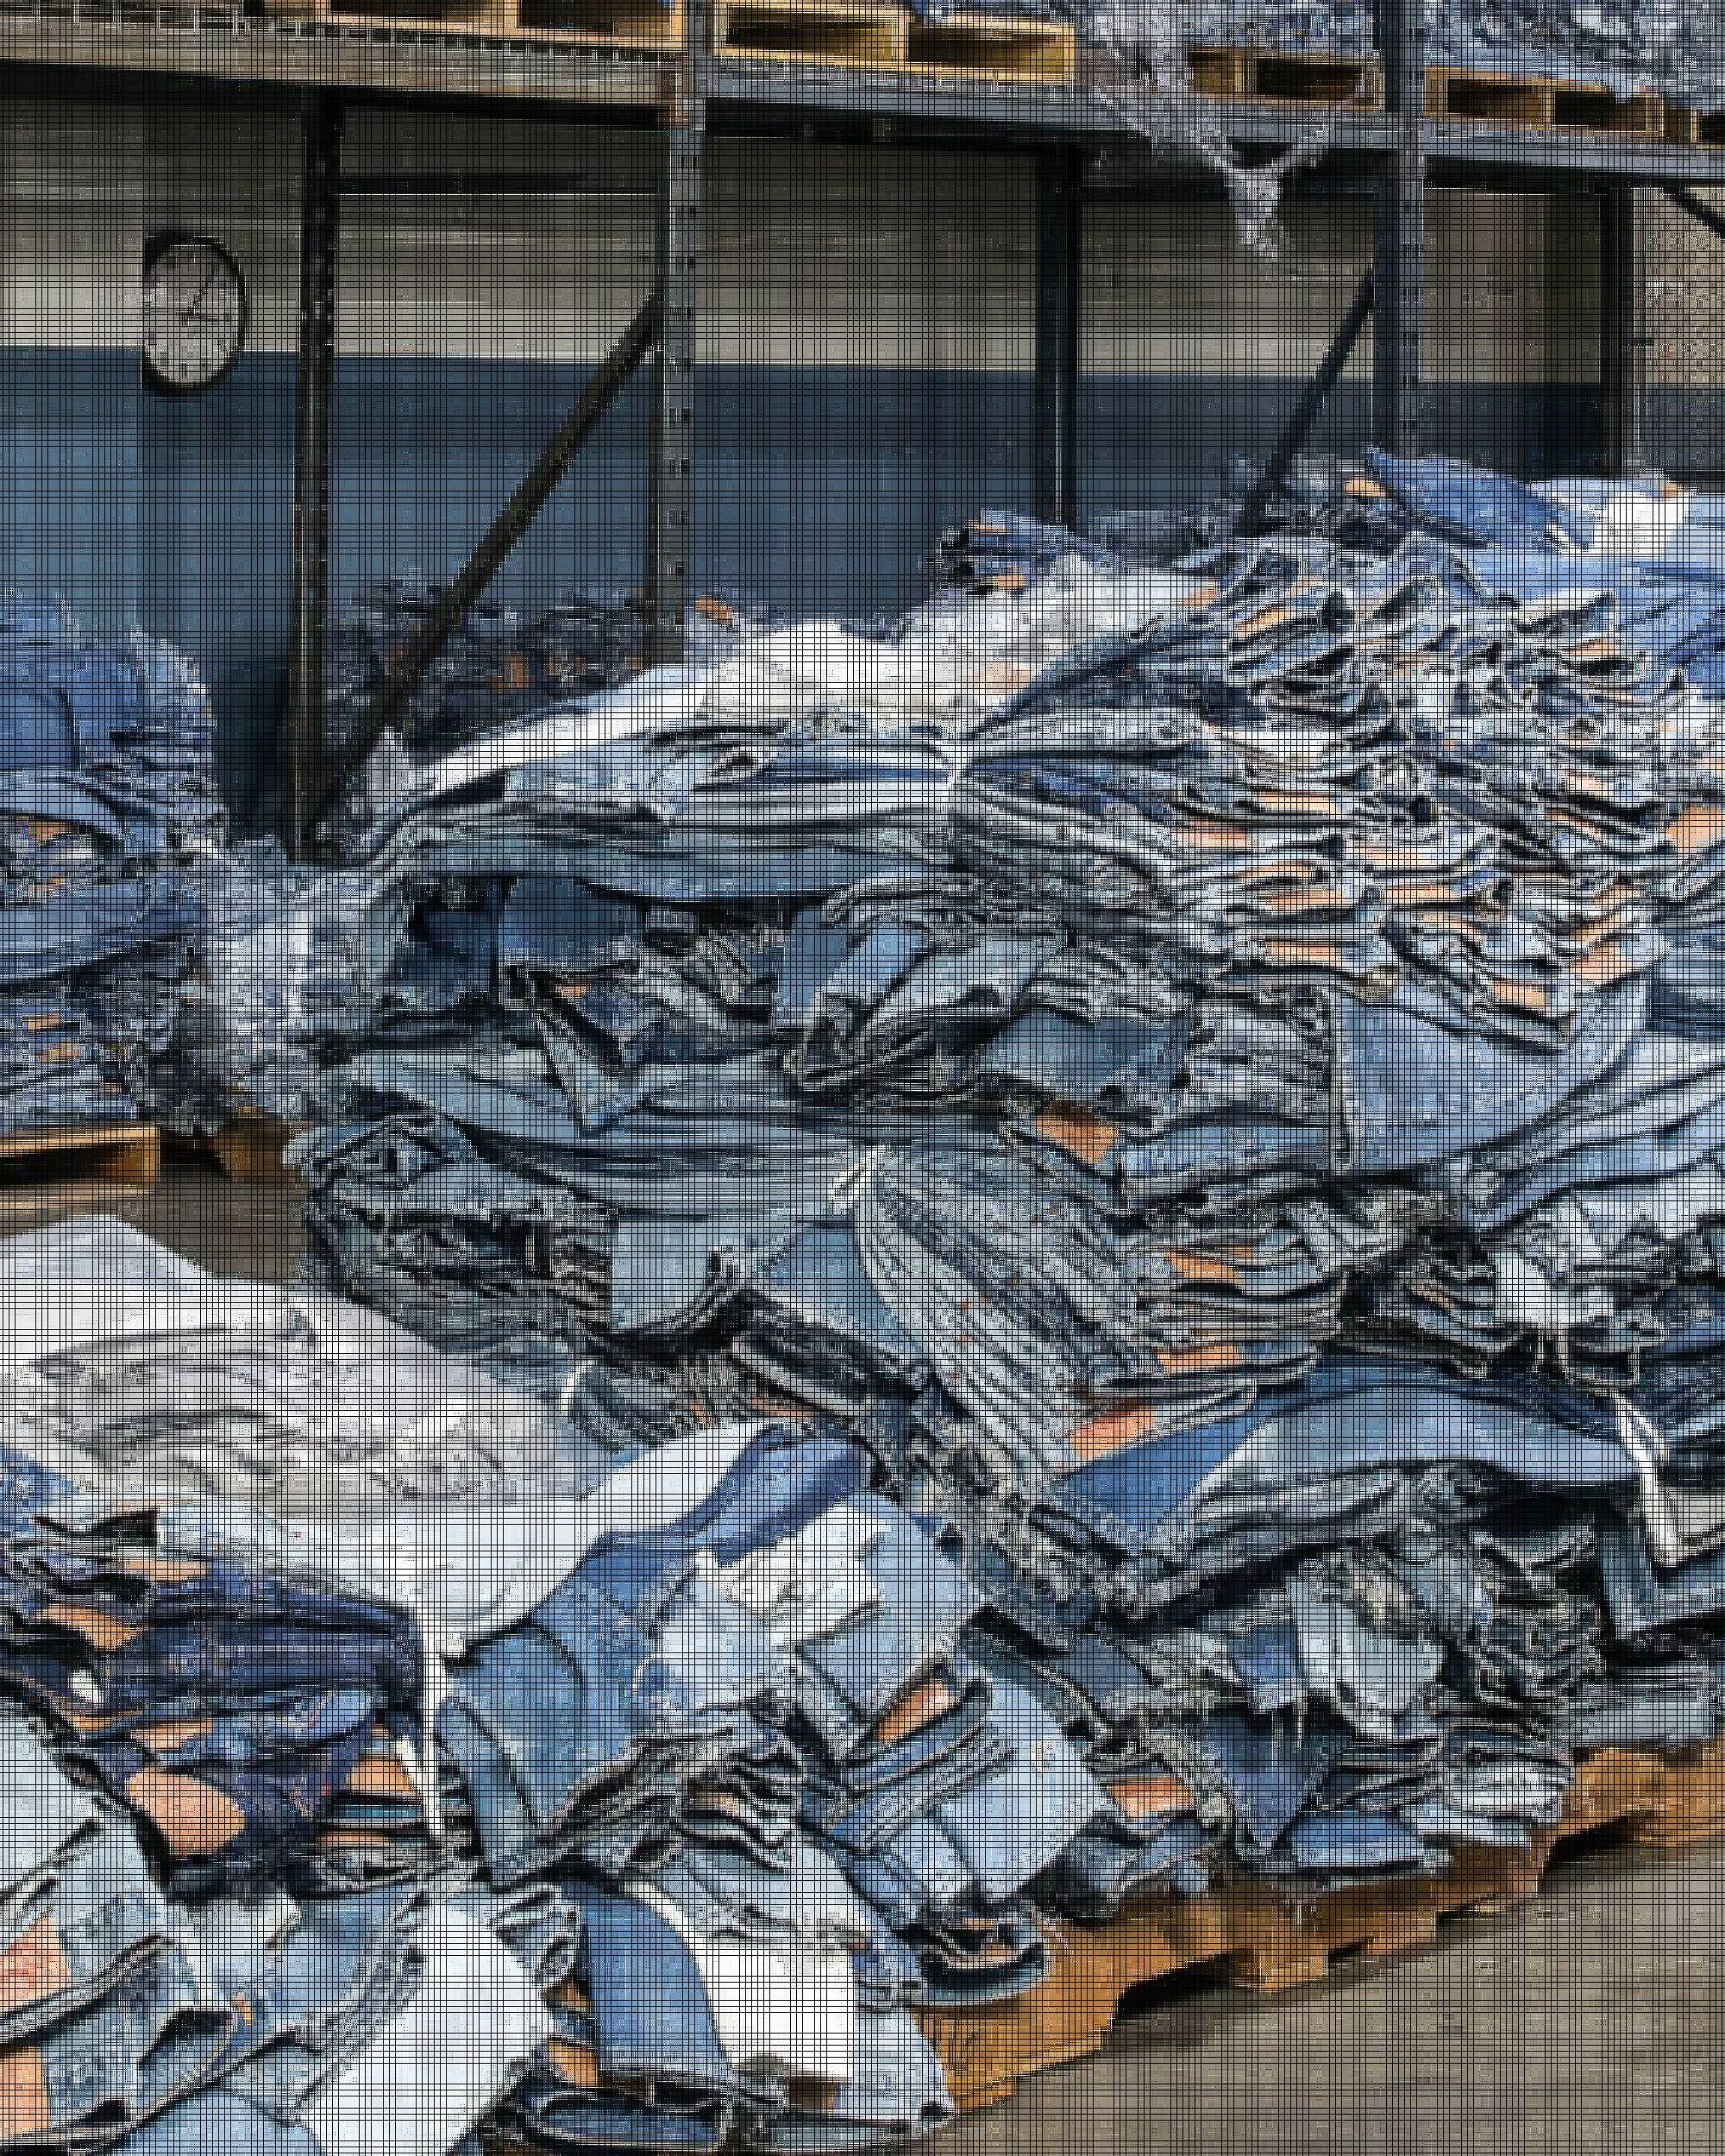 Levi's Authorized Vintage collection of jeans stacked on top of eachother.